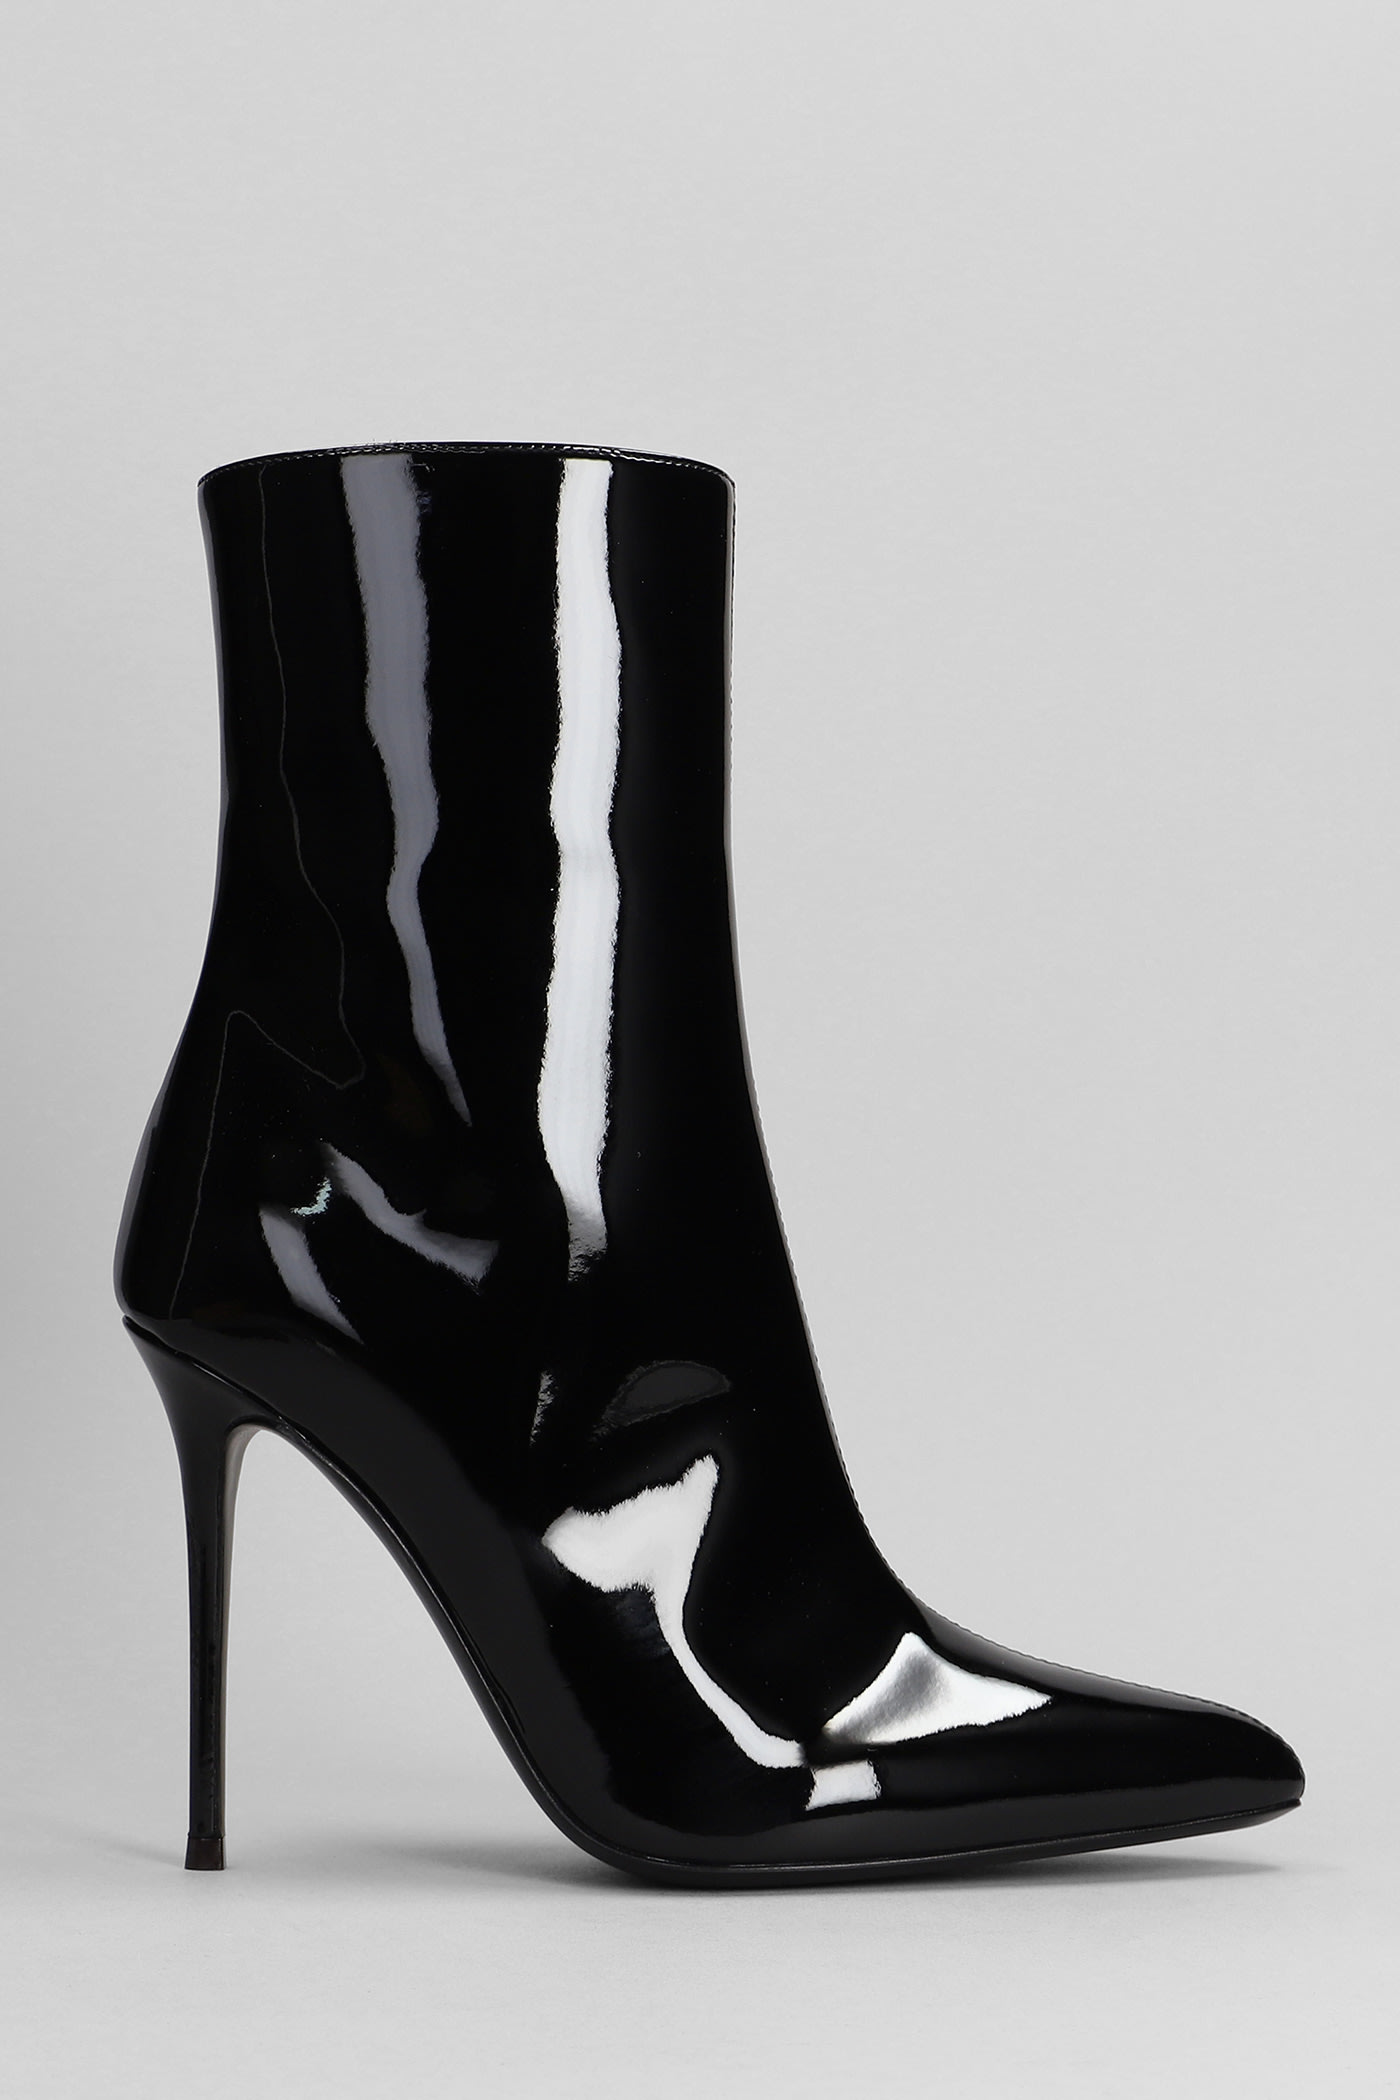 GIUSEPPE ZANOTTI BRYTTA HIGH HEELS ANKLE BOOTS IN BLACK PATENT LEATHER